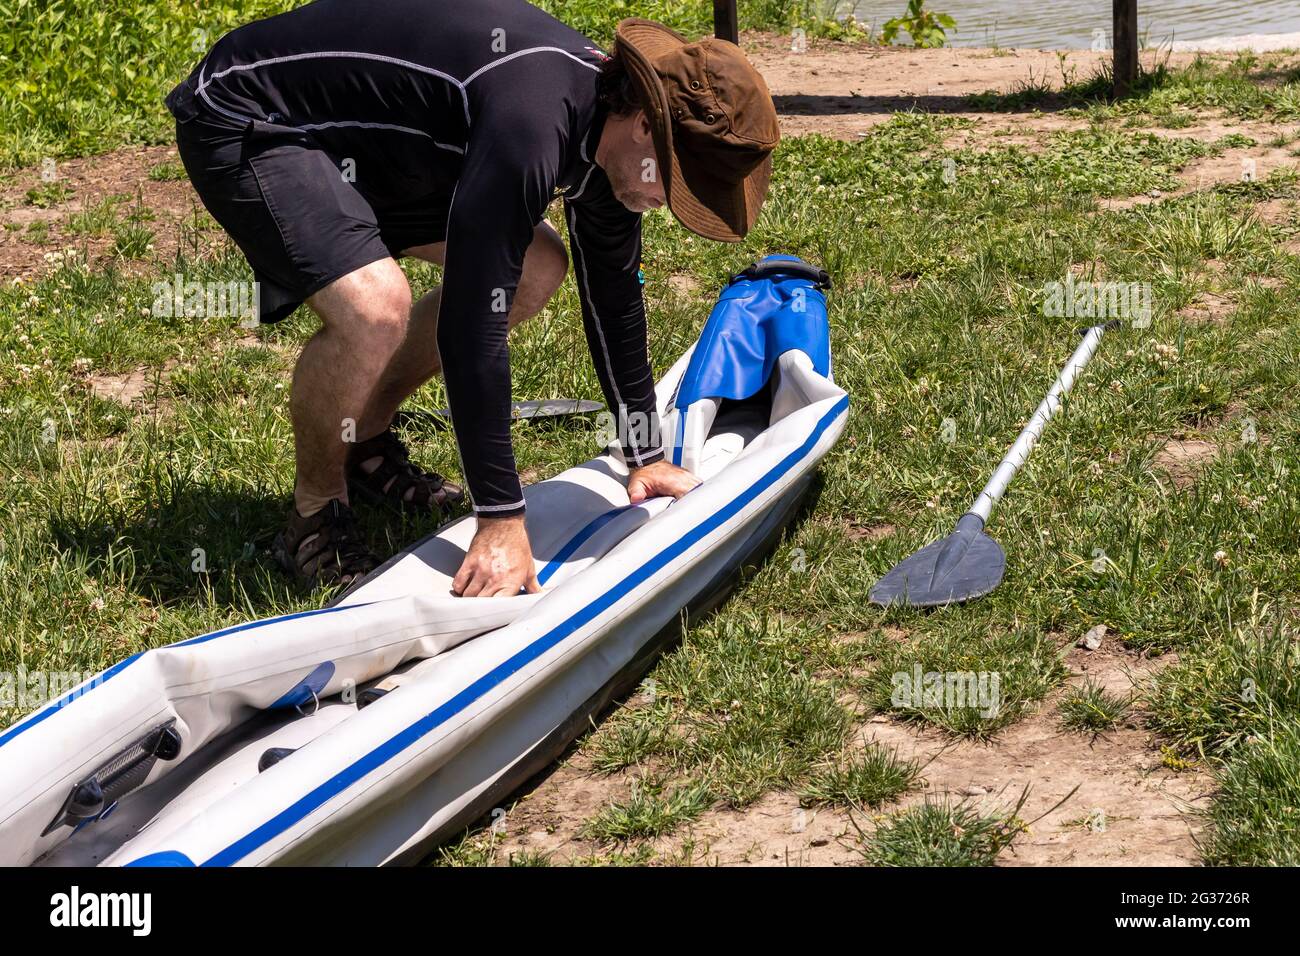 Middle aged man in brown hat, black swim shirt and shorts, folding up deflated inflatable kayak. Preparing it for storage. Paddle on ground next to it. Stock Photo